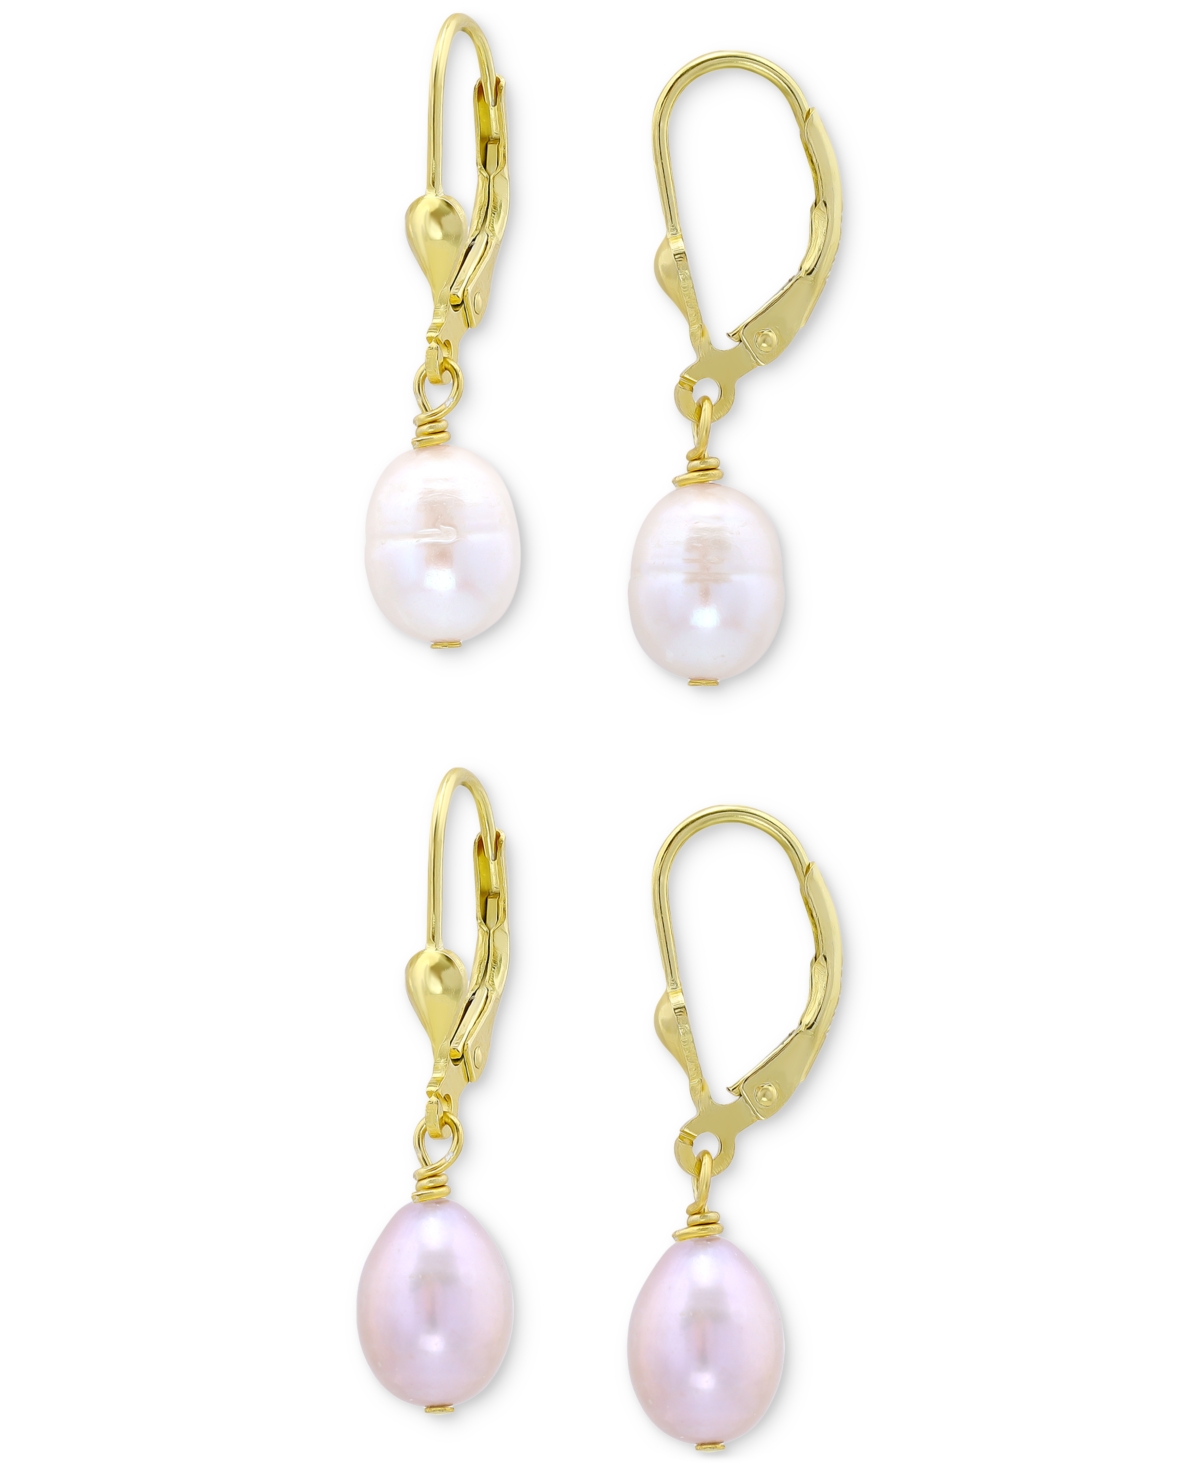 2-Pc. Set White & Dyed Pink Cultured Freshwater Oval Pearl (10 x 8mm) Leverback Drop Earrings - Gold Over Silver